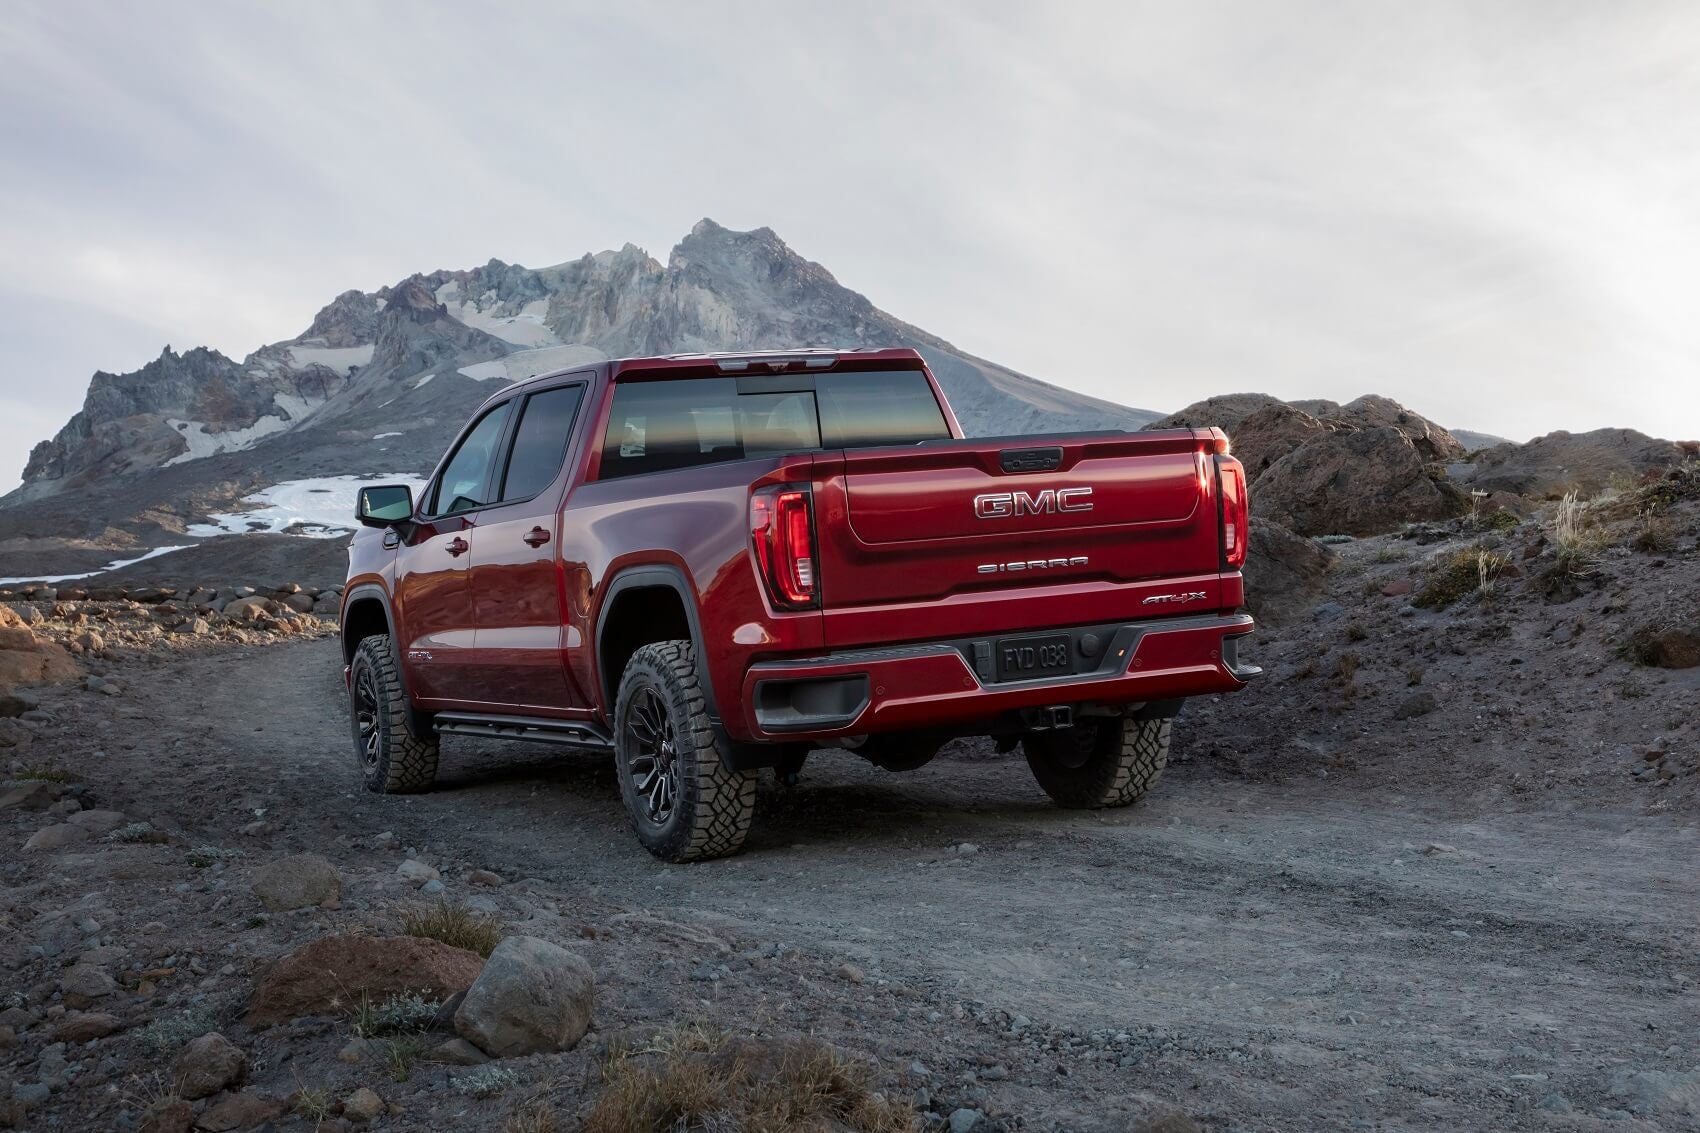 The GMC Sierra 1500 Is a One-of-a-Kind Truck